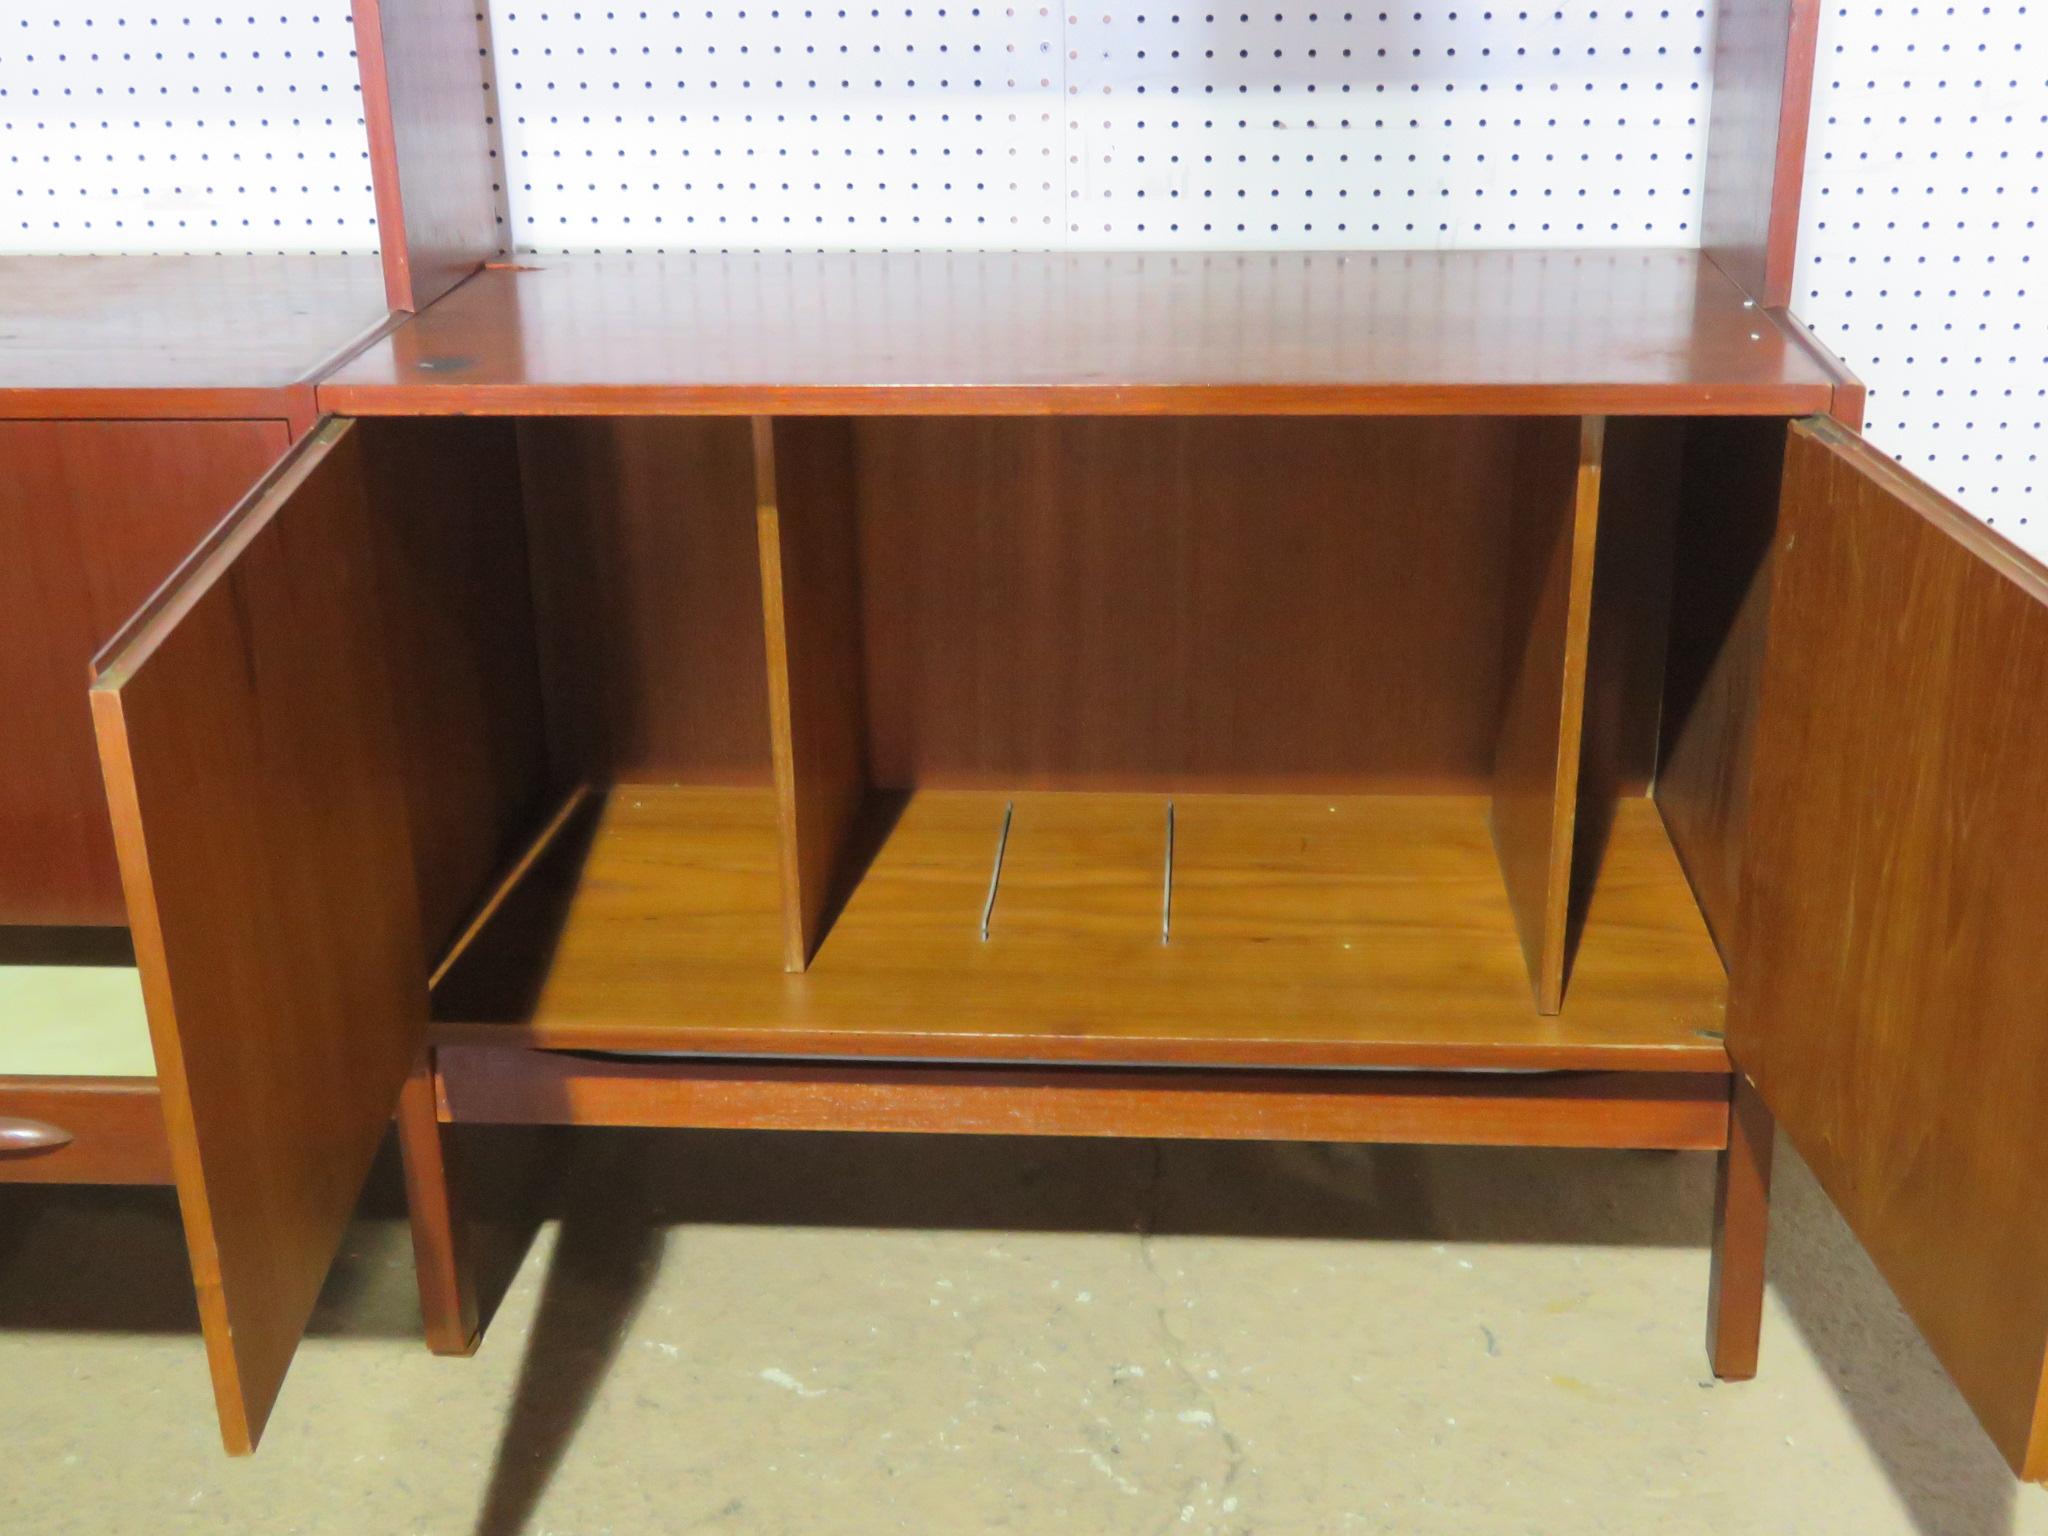 20th Century Mid-Century Modern Wall Unit, manner of Nils Thorsson